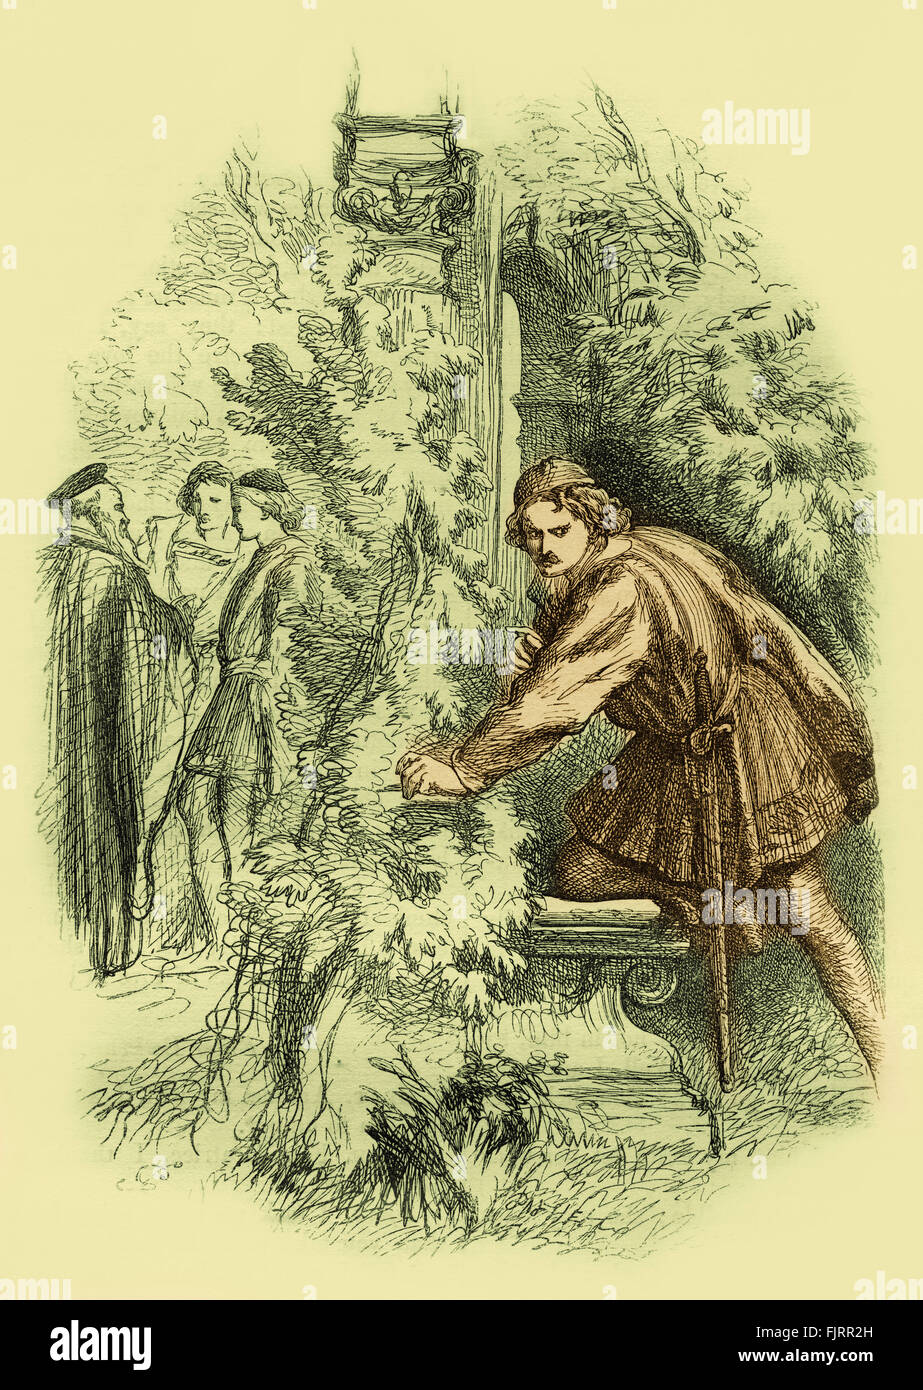 Much Ado about Nothing by William Shakespeare.  .  Act II scene  3. . Benedick listening while hidden to conversation between Don Pedro, Leonato, Claudio and Balthazar.  Illustration by John Gilbert. English poet and playwright baptised 26 April 1564 – 23 April 1616. Stock Photo